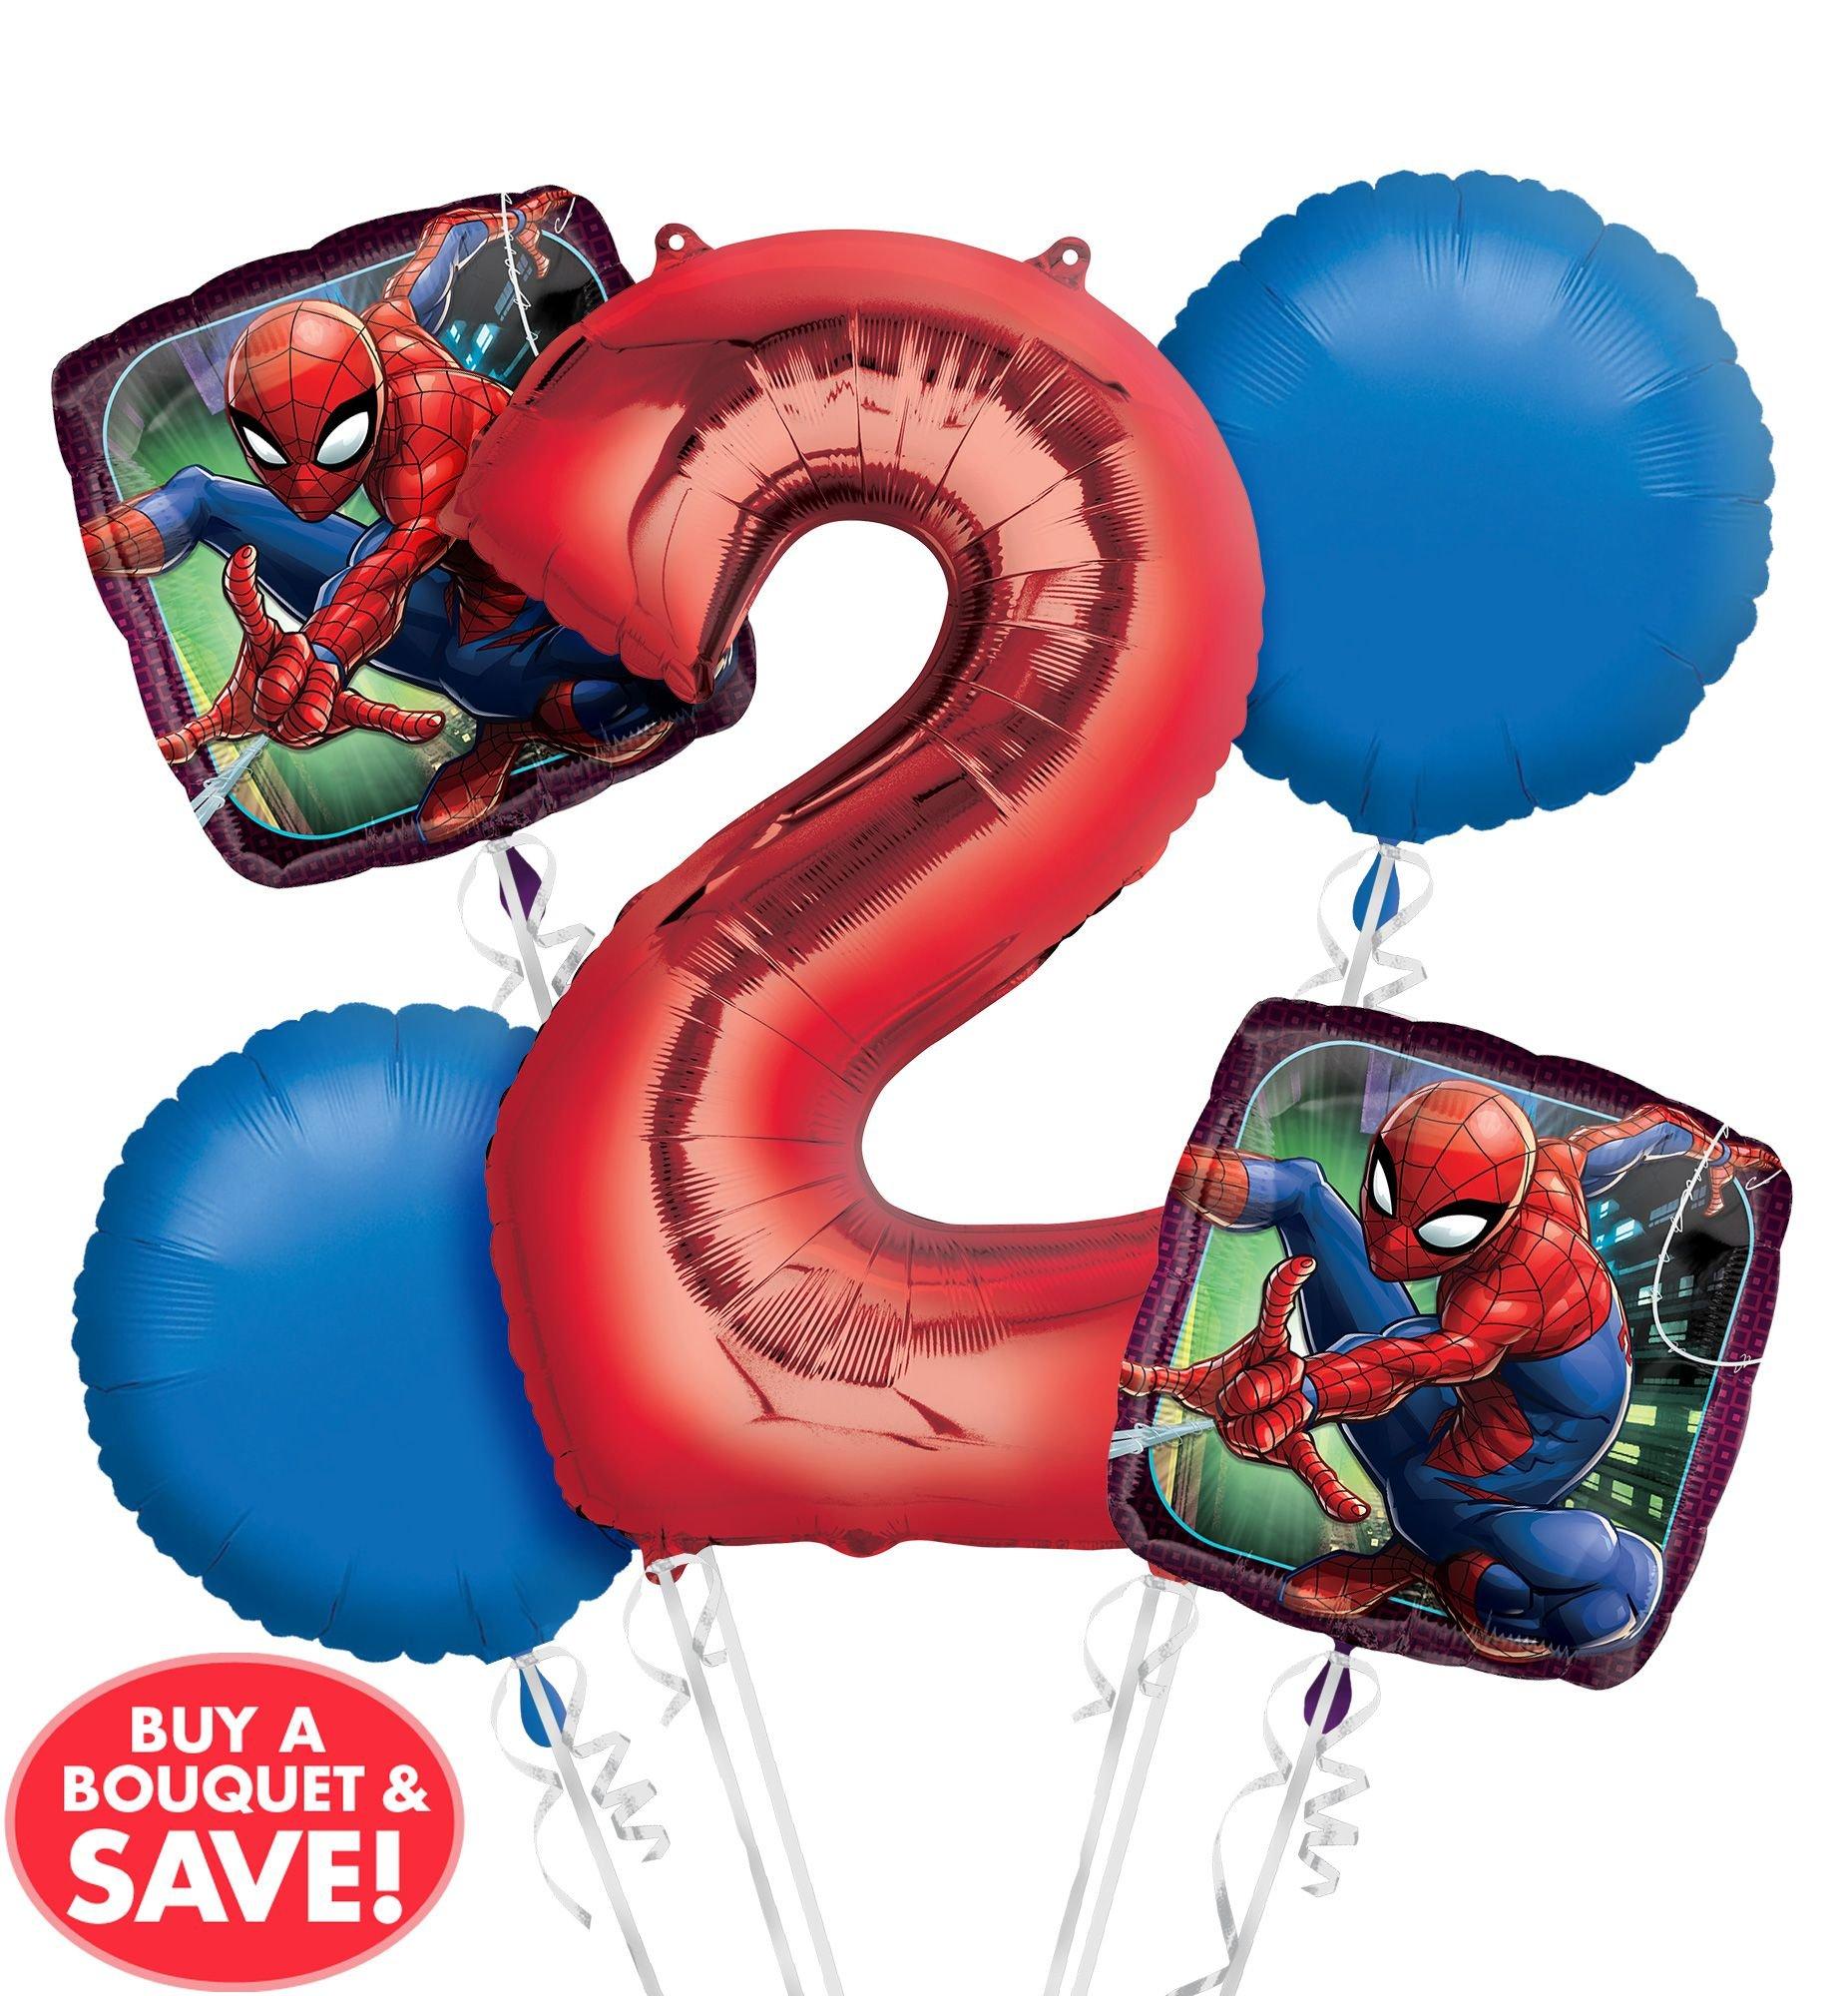 Spiderman 2nd Birthday Balloon Bouquet 5pc | Party City